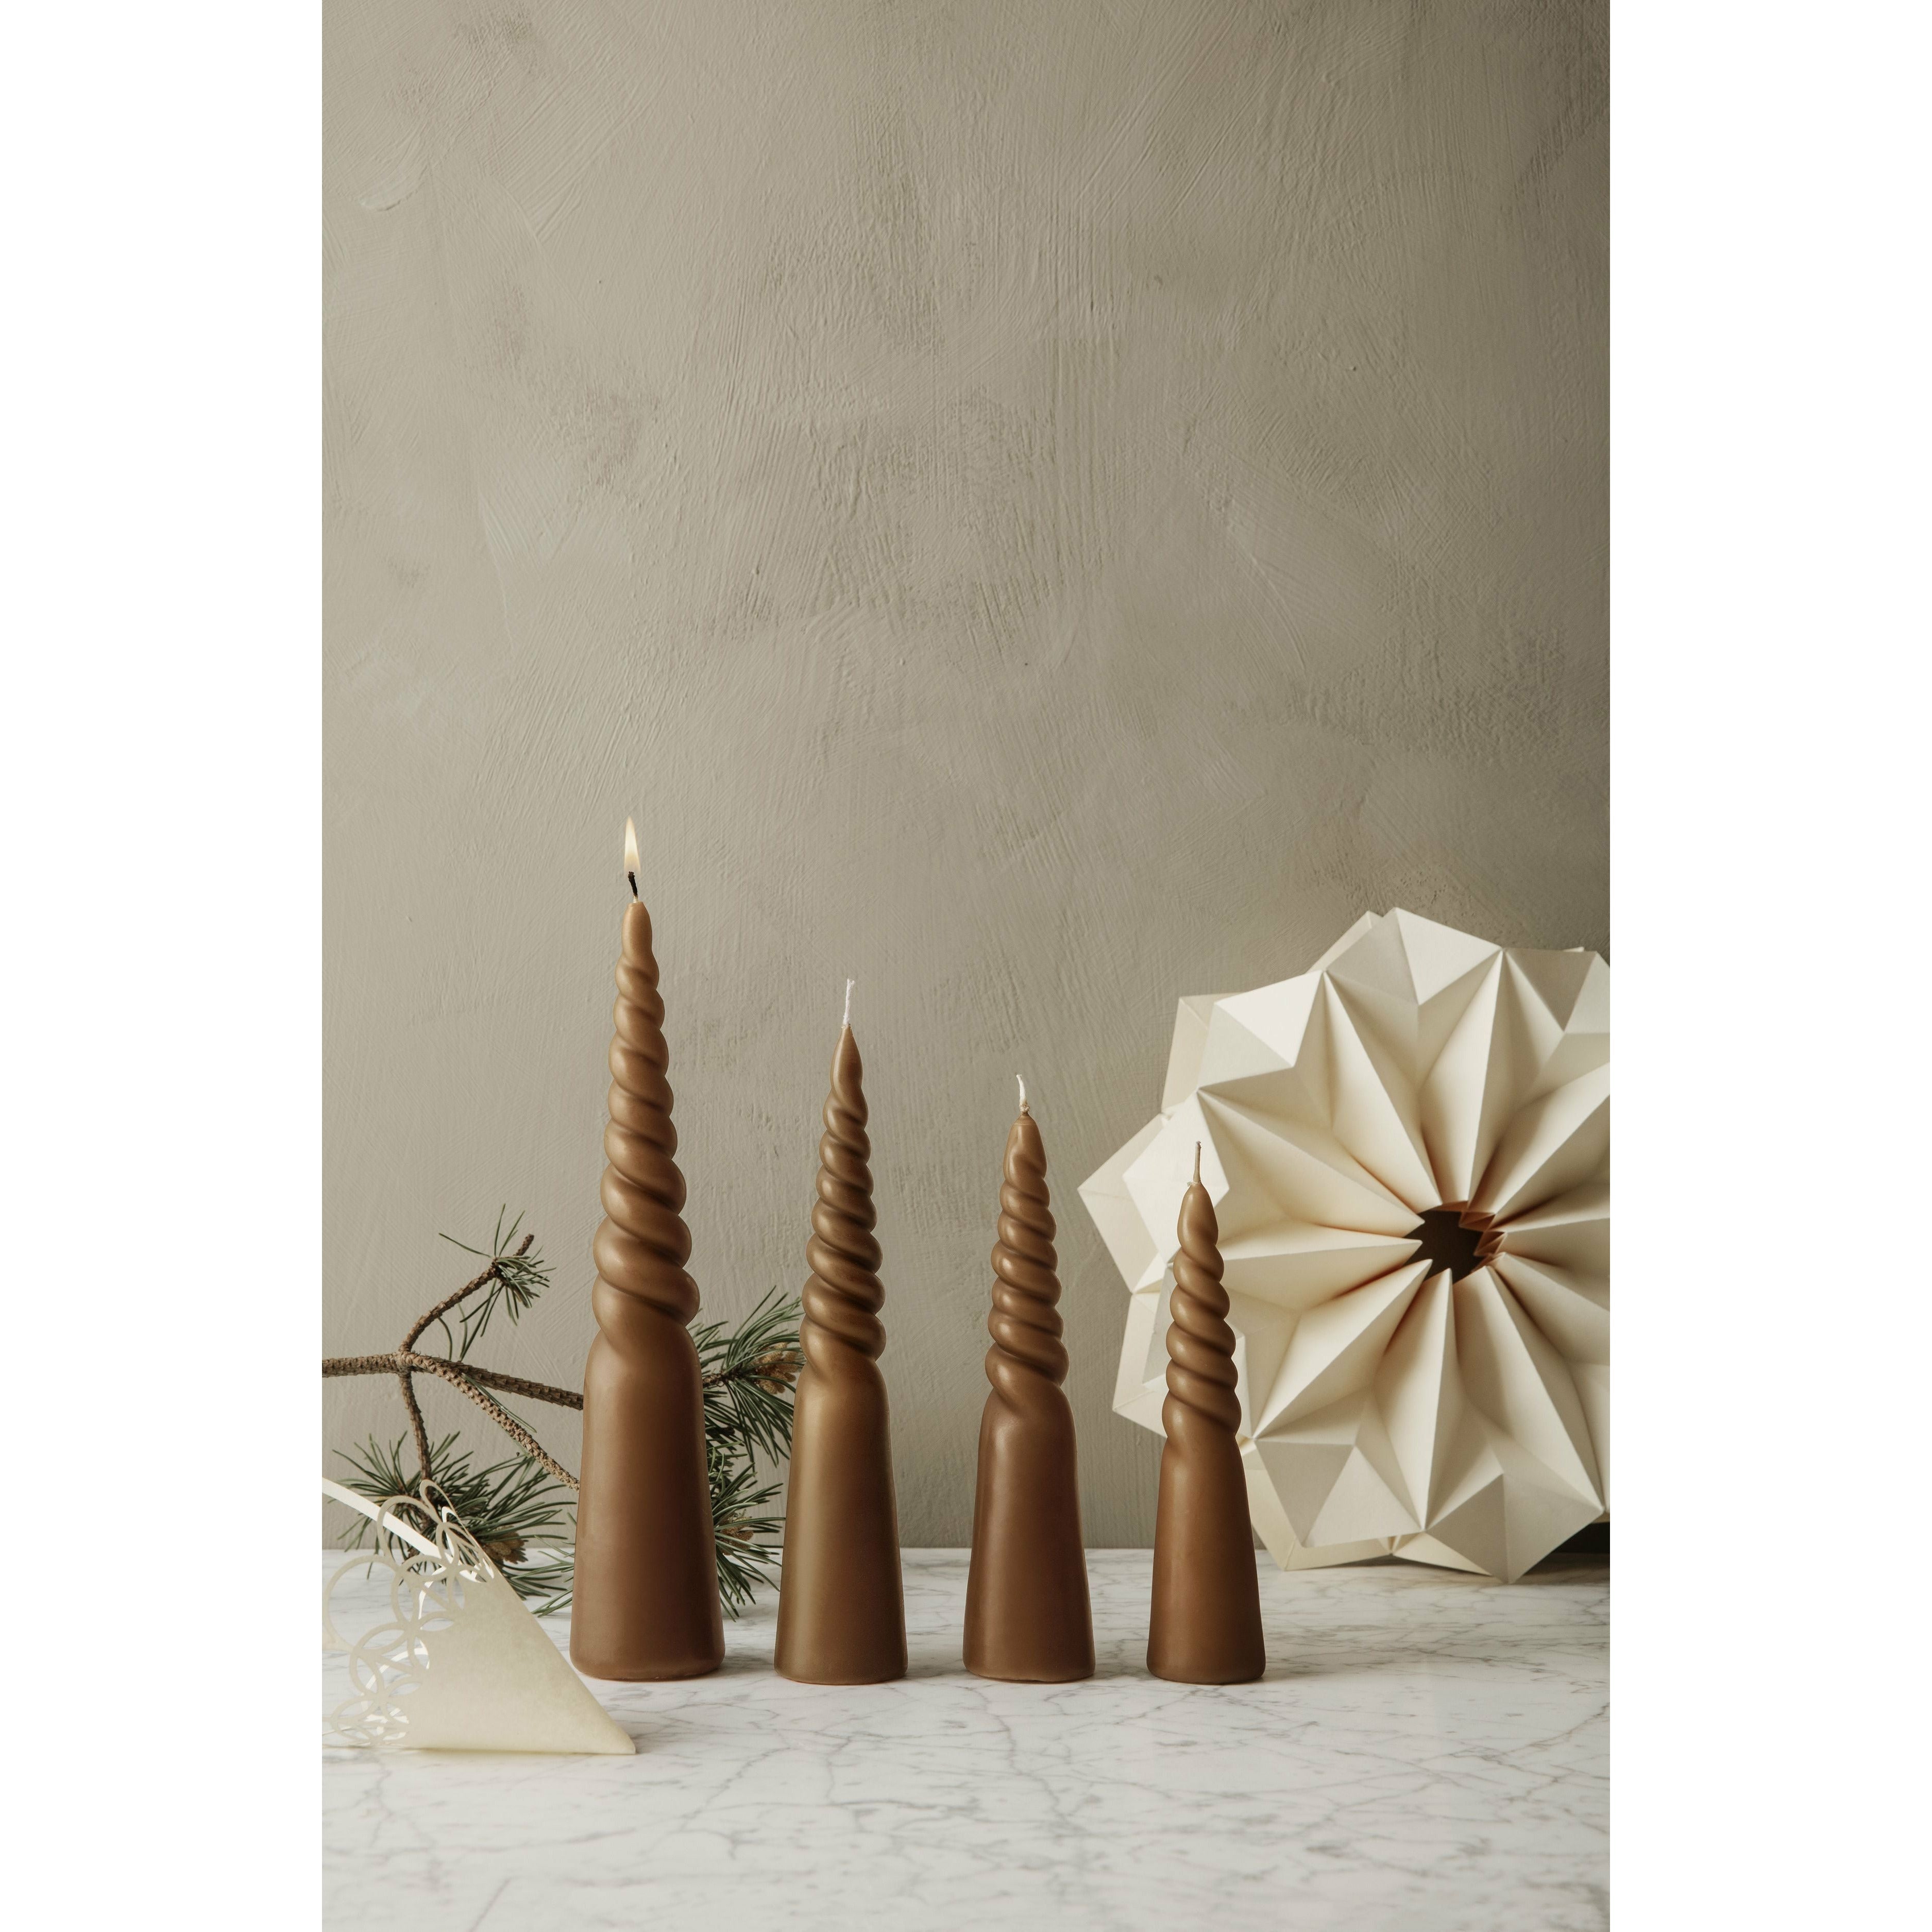 Ferm Living Twisted Candles Set Of 4, Straw